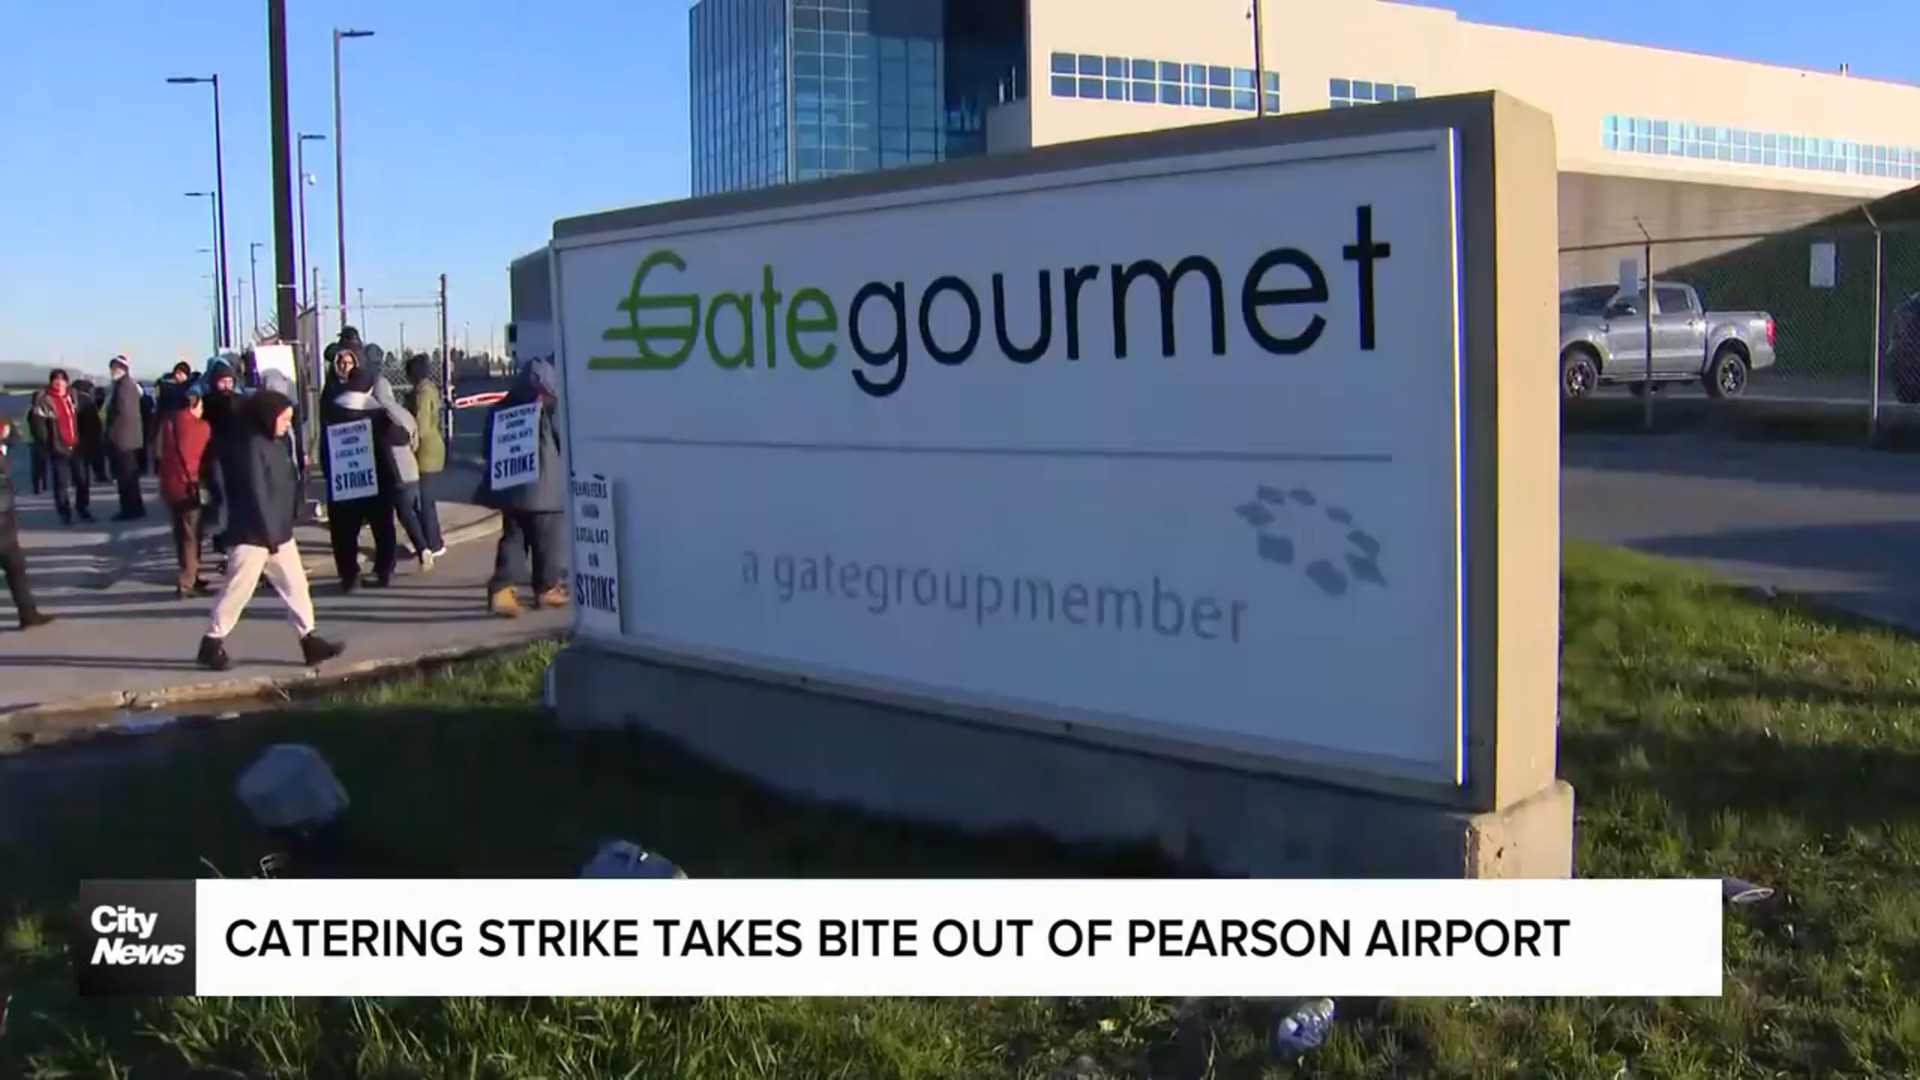 A strike by airline catering workers could leave passengers hungry at Pearson airport